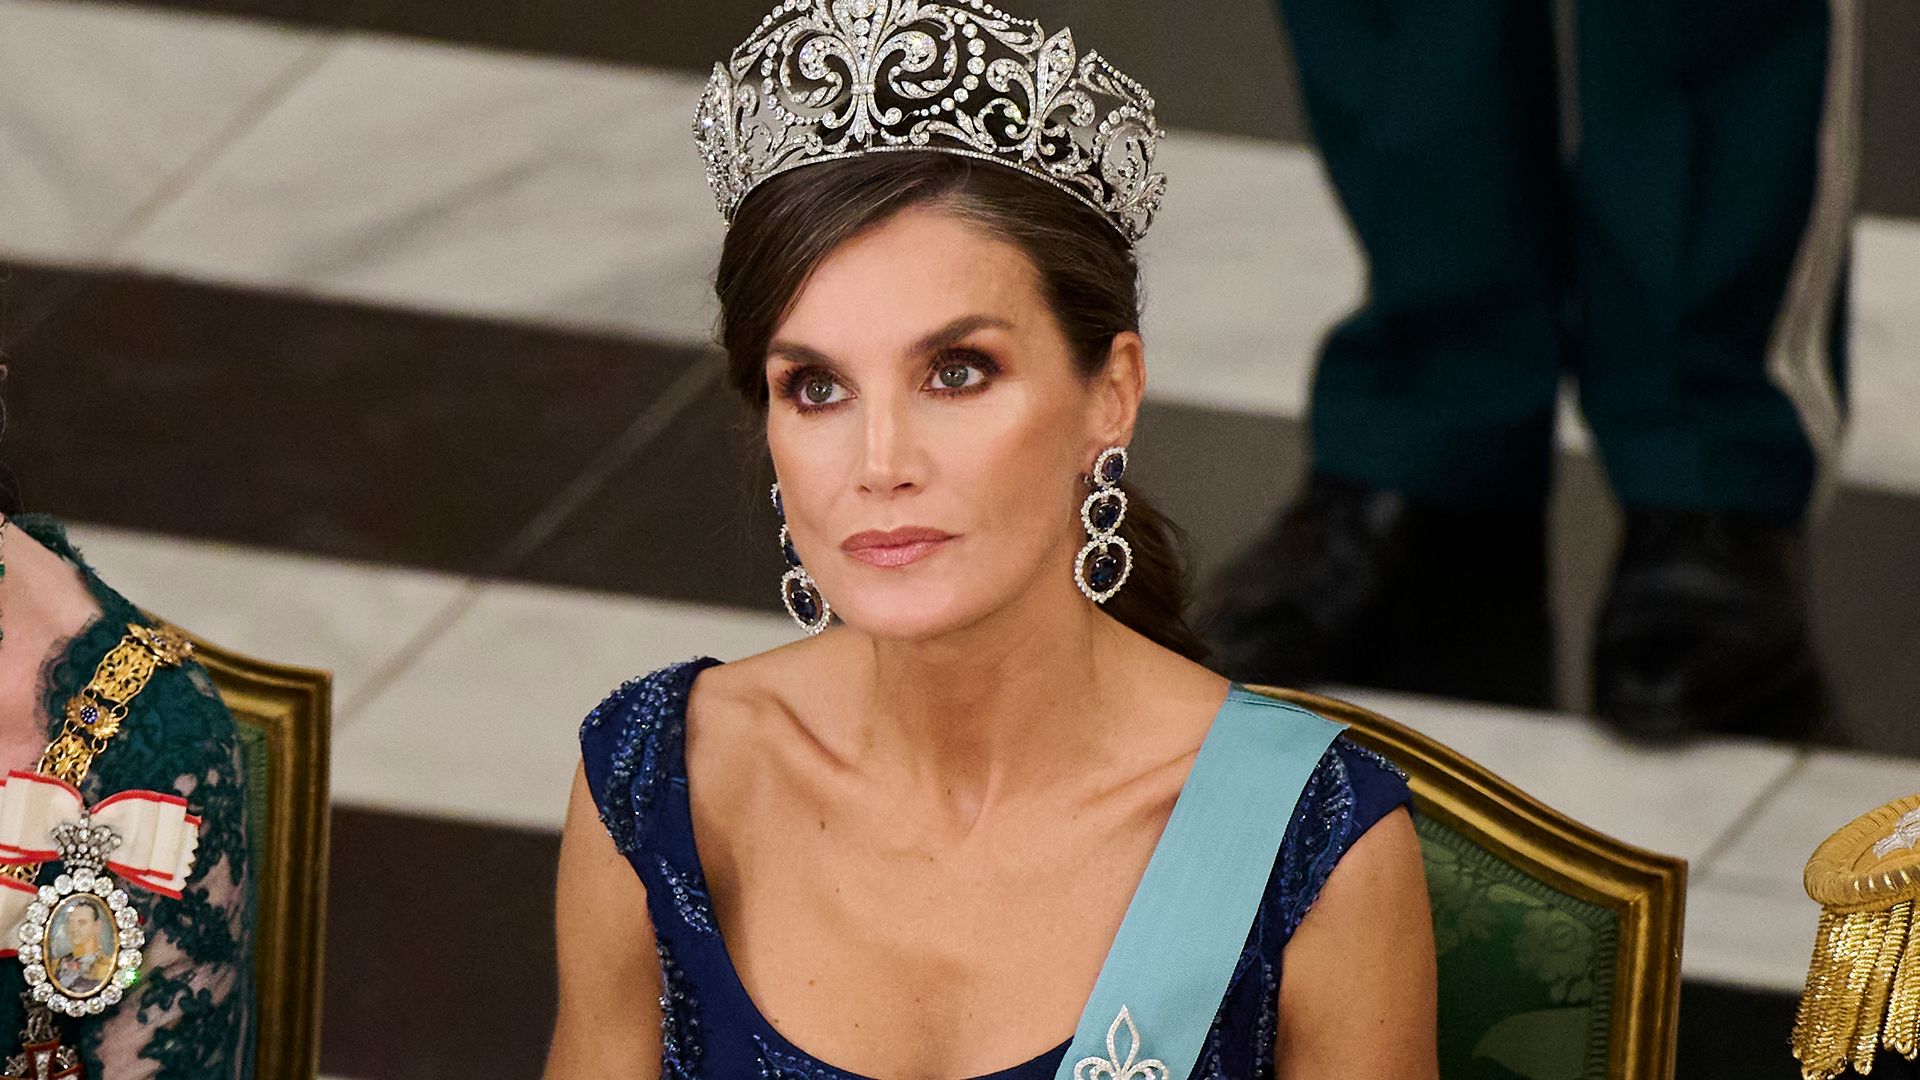 The mother-of-two chose to wear the stunning Tiara de Lis